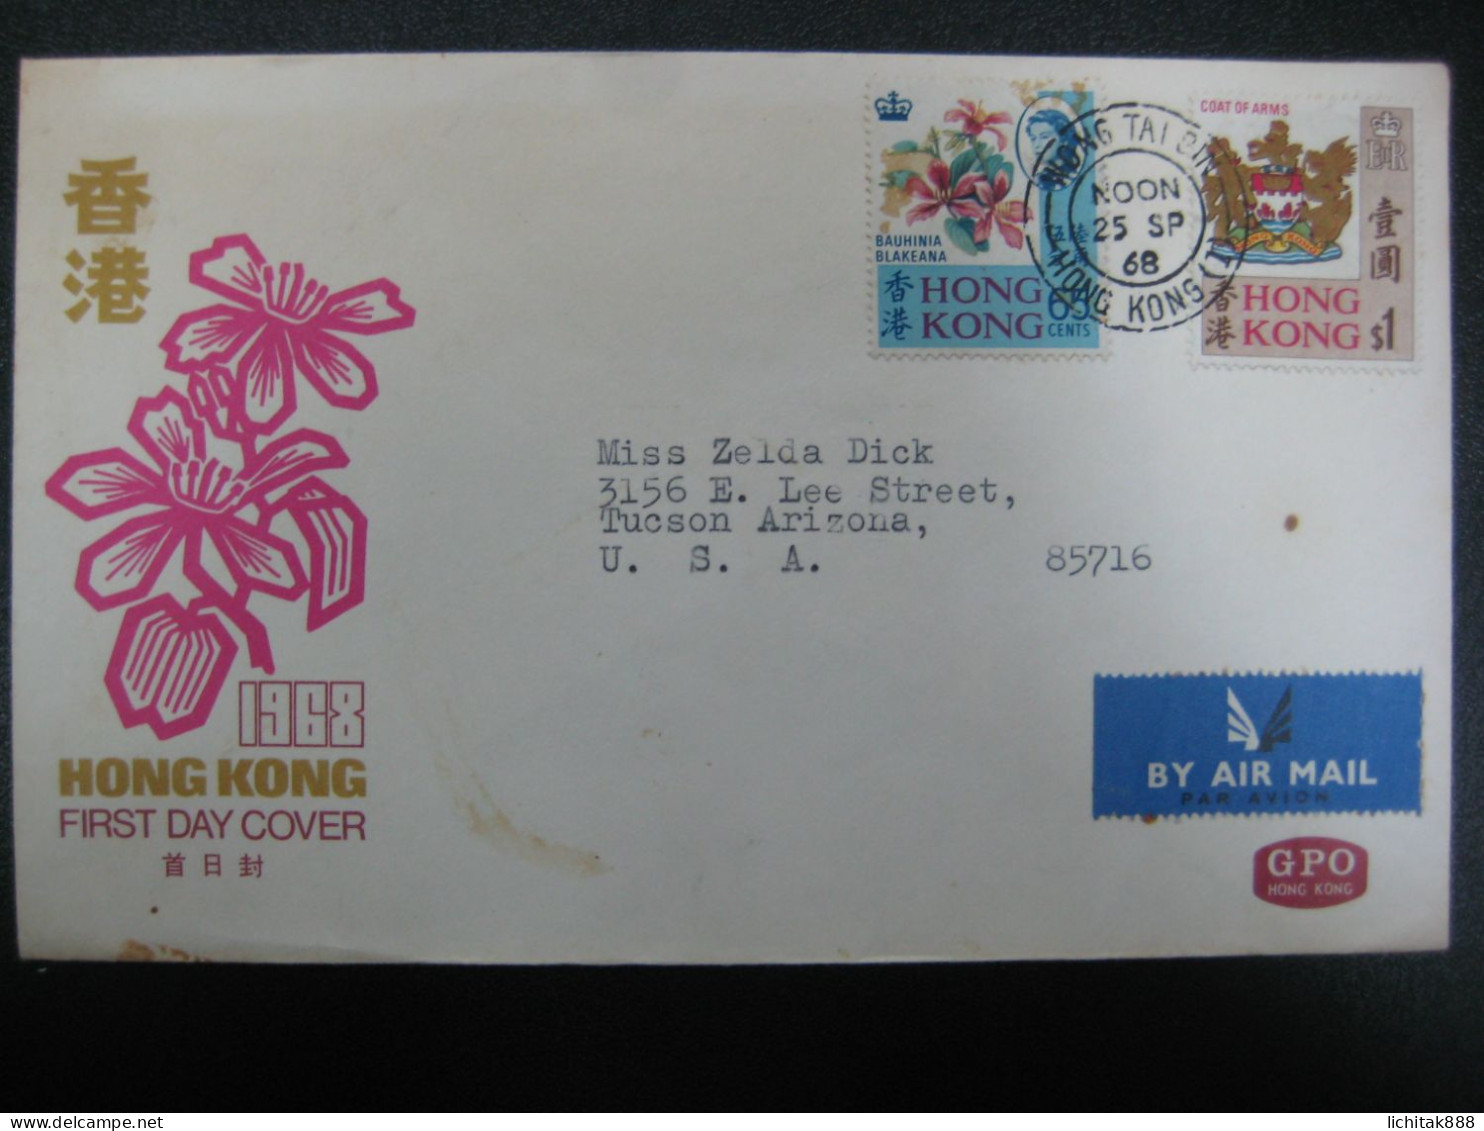 1968 Hong Kong  Bauhinia Blakeana Flower & Coast Of Arms GPO FDC First Day Cover - Lettres & Documents